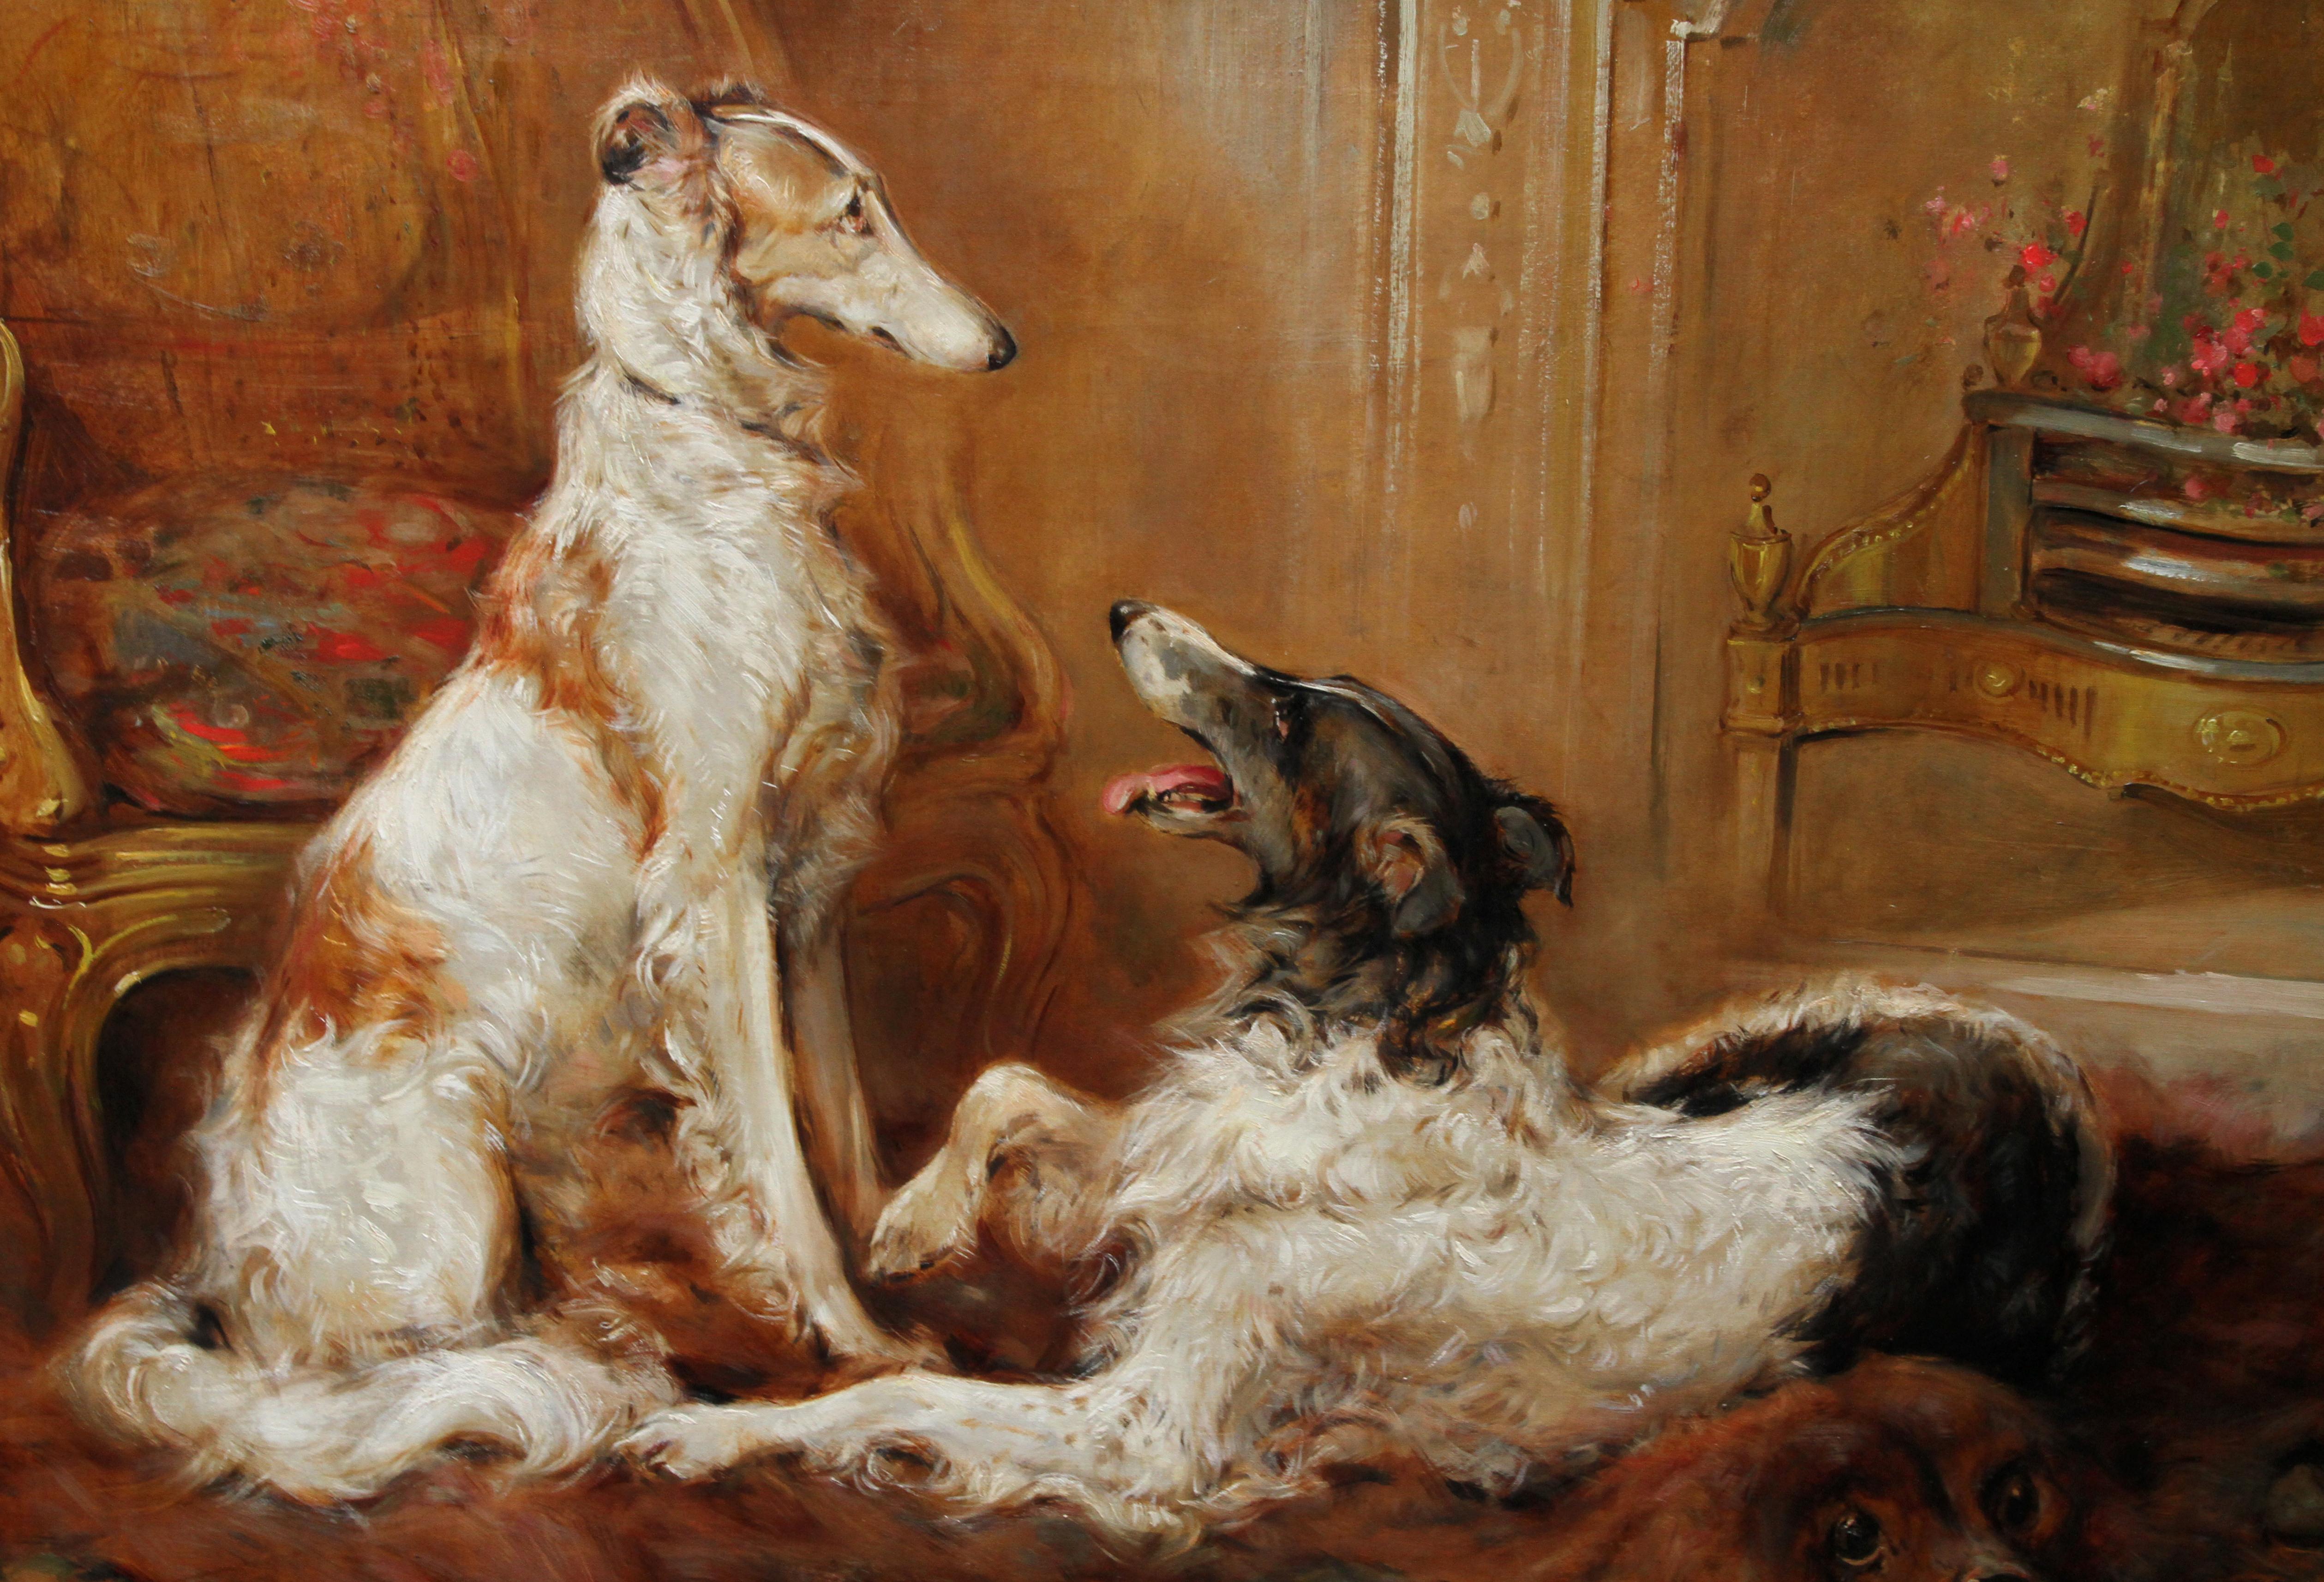 This charming Edwardian oil painting is by famous British animal artist Philip Eustace Stretton. This lovely portrait of dogs was painted in 1910 and is an excellent example of Stretton's sensitive portrayal of dogs and his detailed brushwork. The